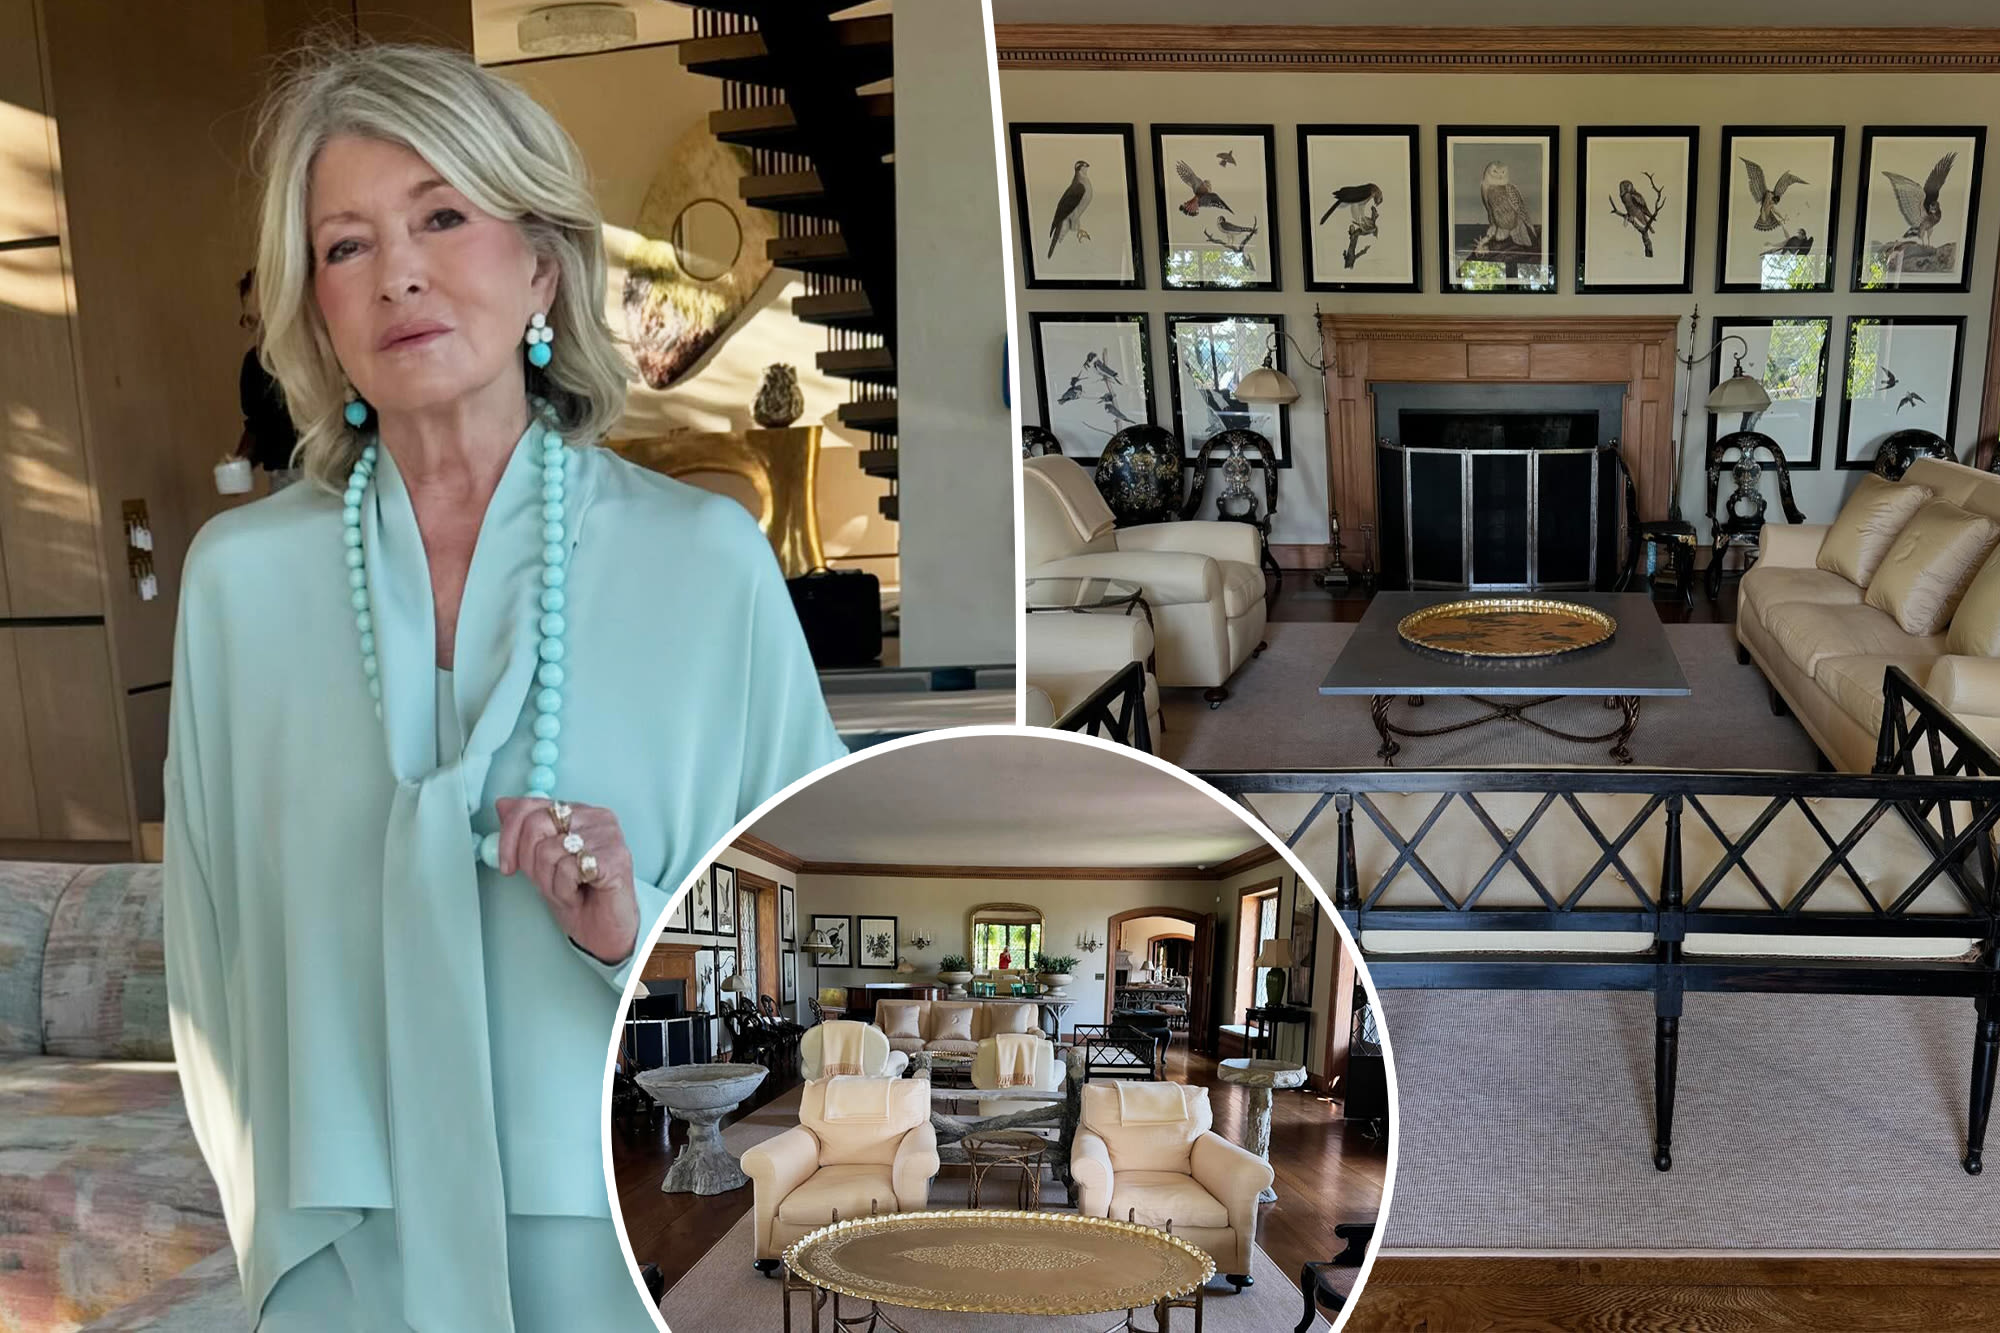 Martha Stewart claps back at ‘harsh judgment’ over her newly decorated Maine home